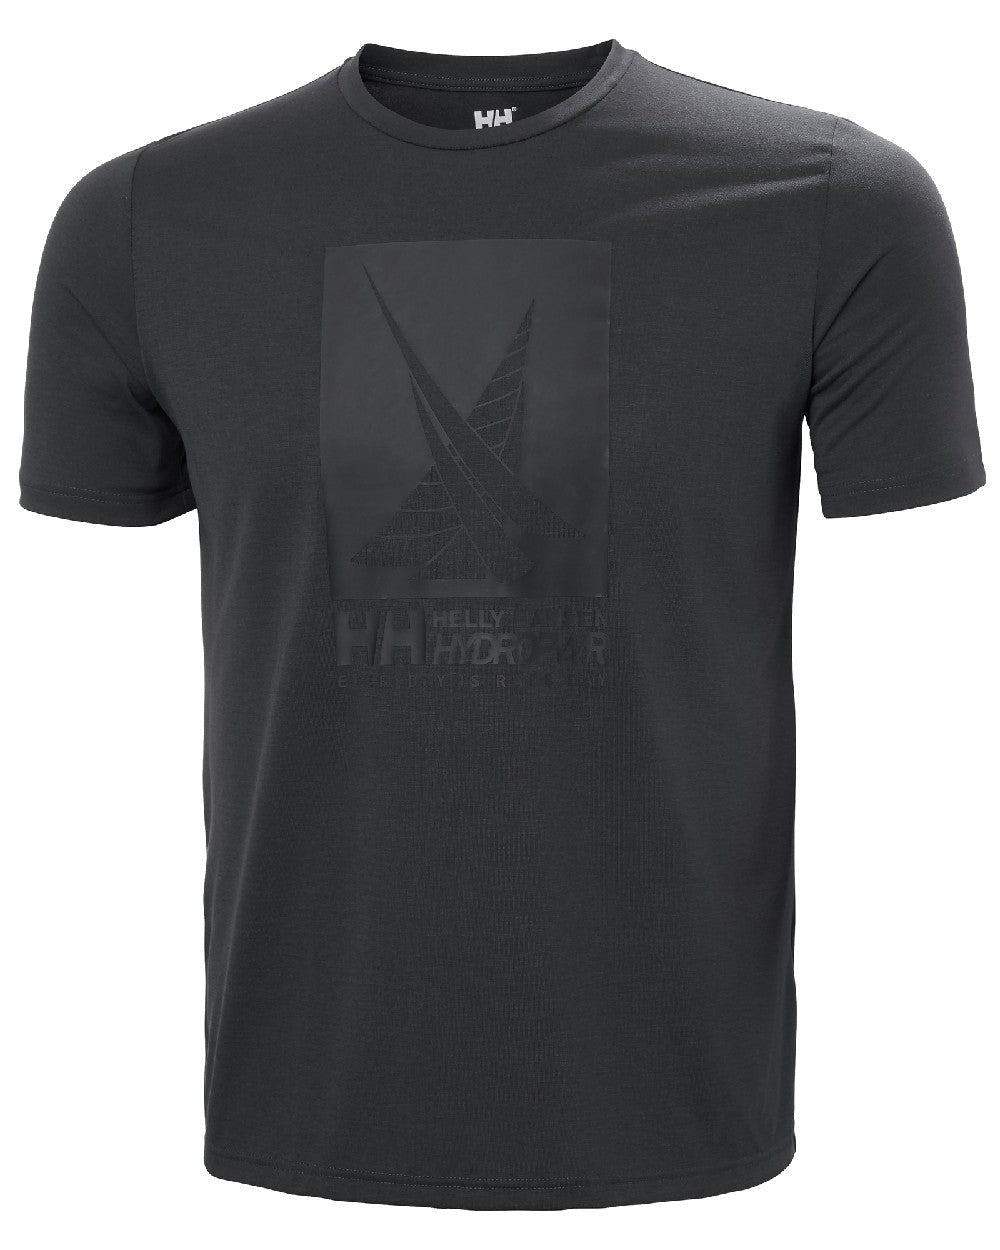 Ebony coloured Helly Hansen Mens HP Race Sailing Graphic T-shirt on white background 